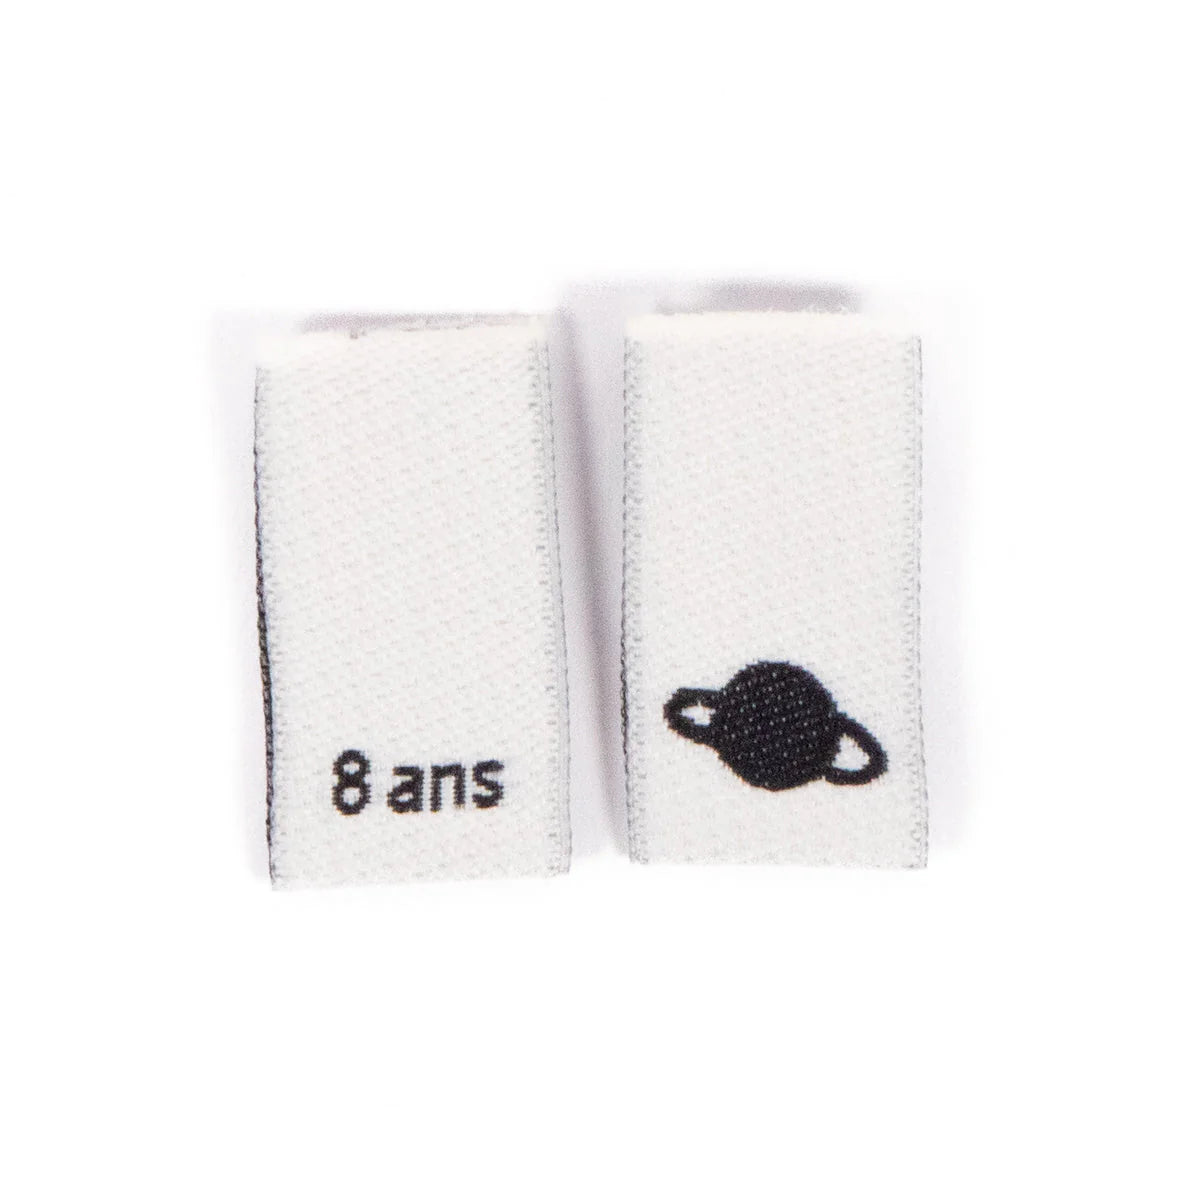 Woven Size Labels 7-Pack - 8 Years